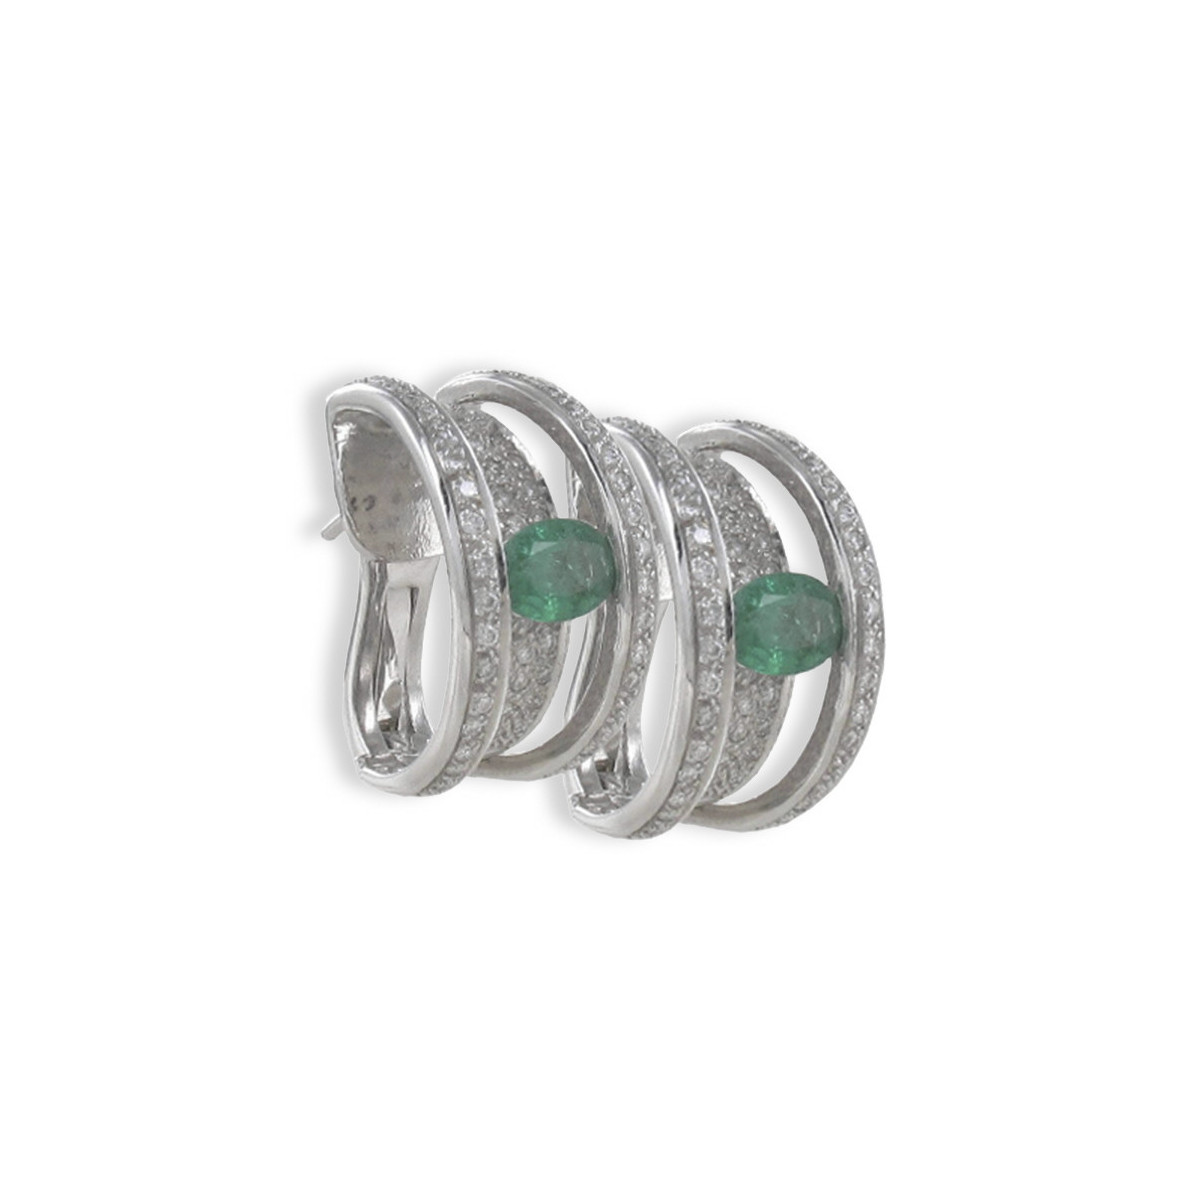 MODERN EARRINGS WITH DIAMONDS AND EMERALD